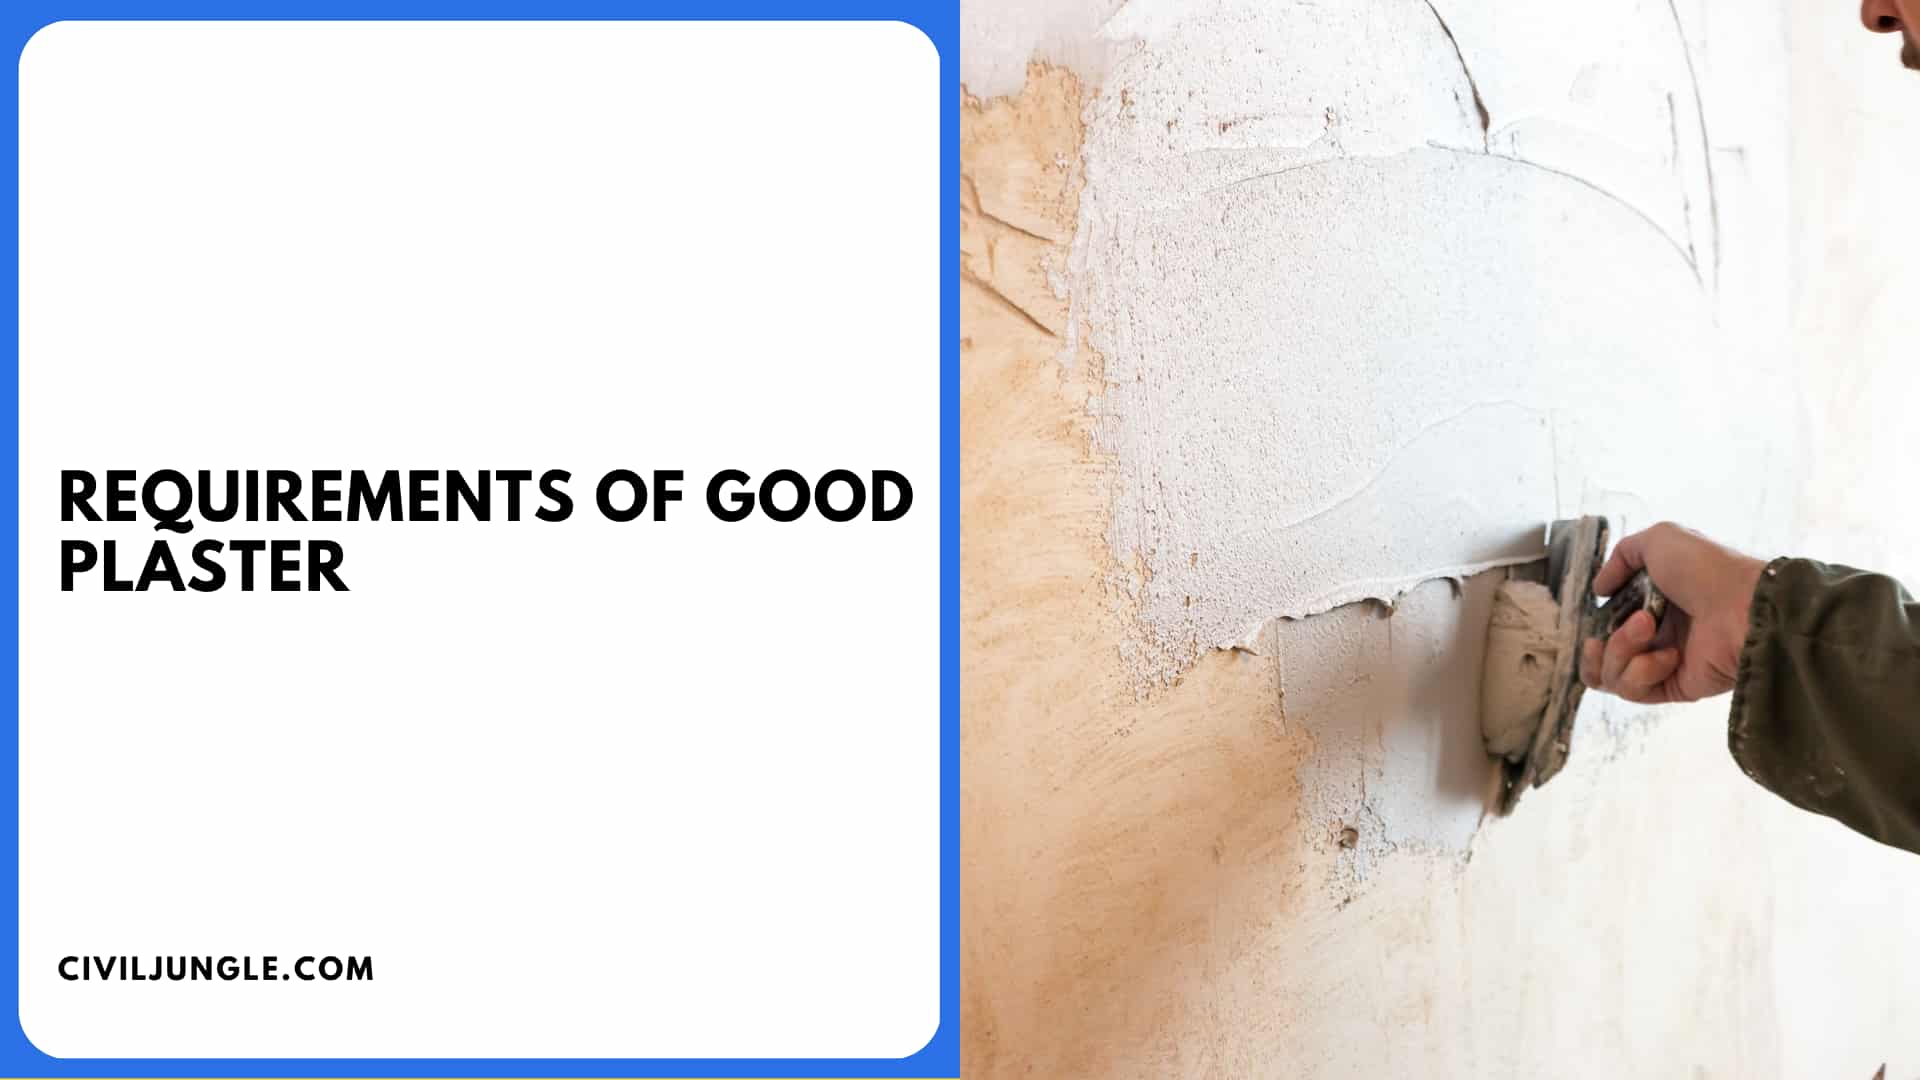 Requirements of Good Plaster